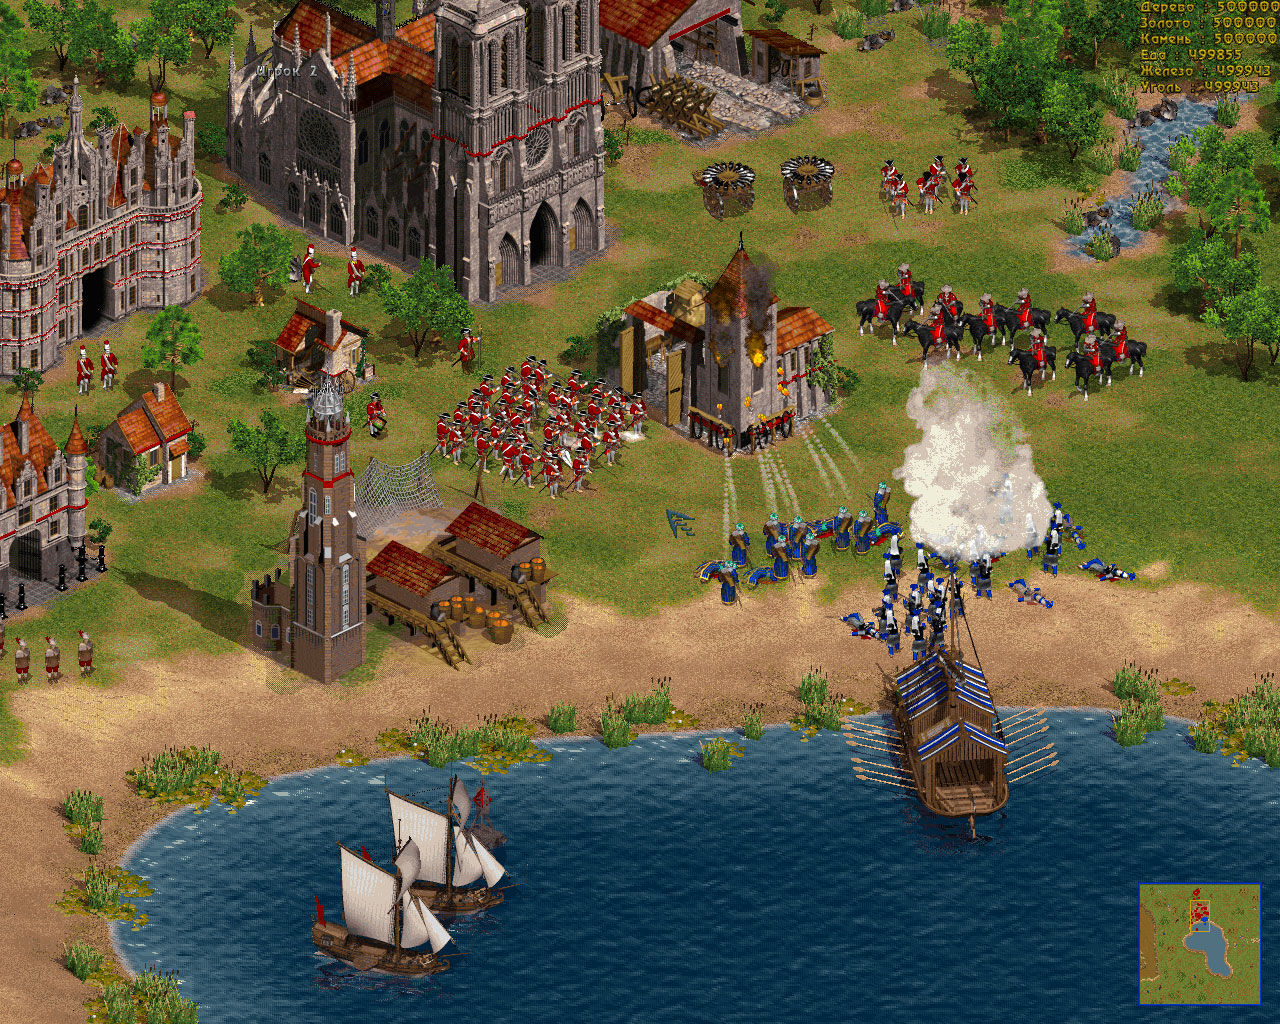 European War 7: Medieval download the new for mac